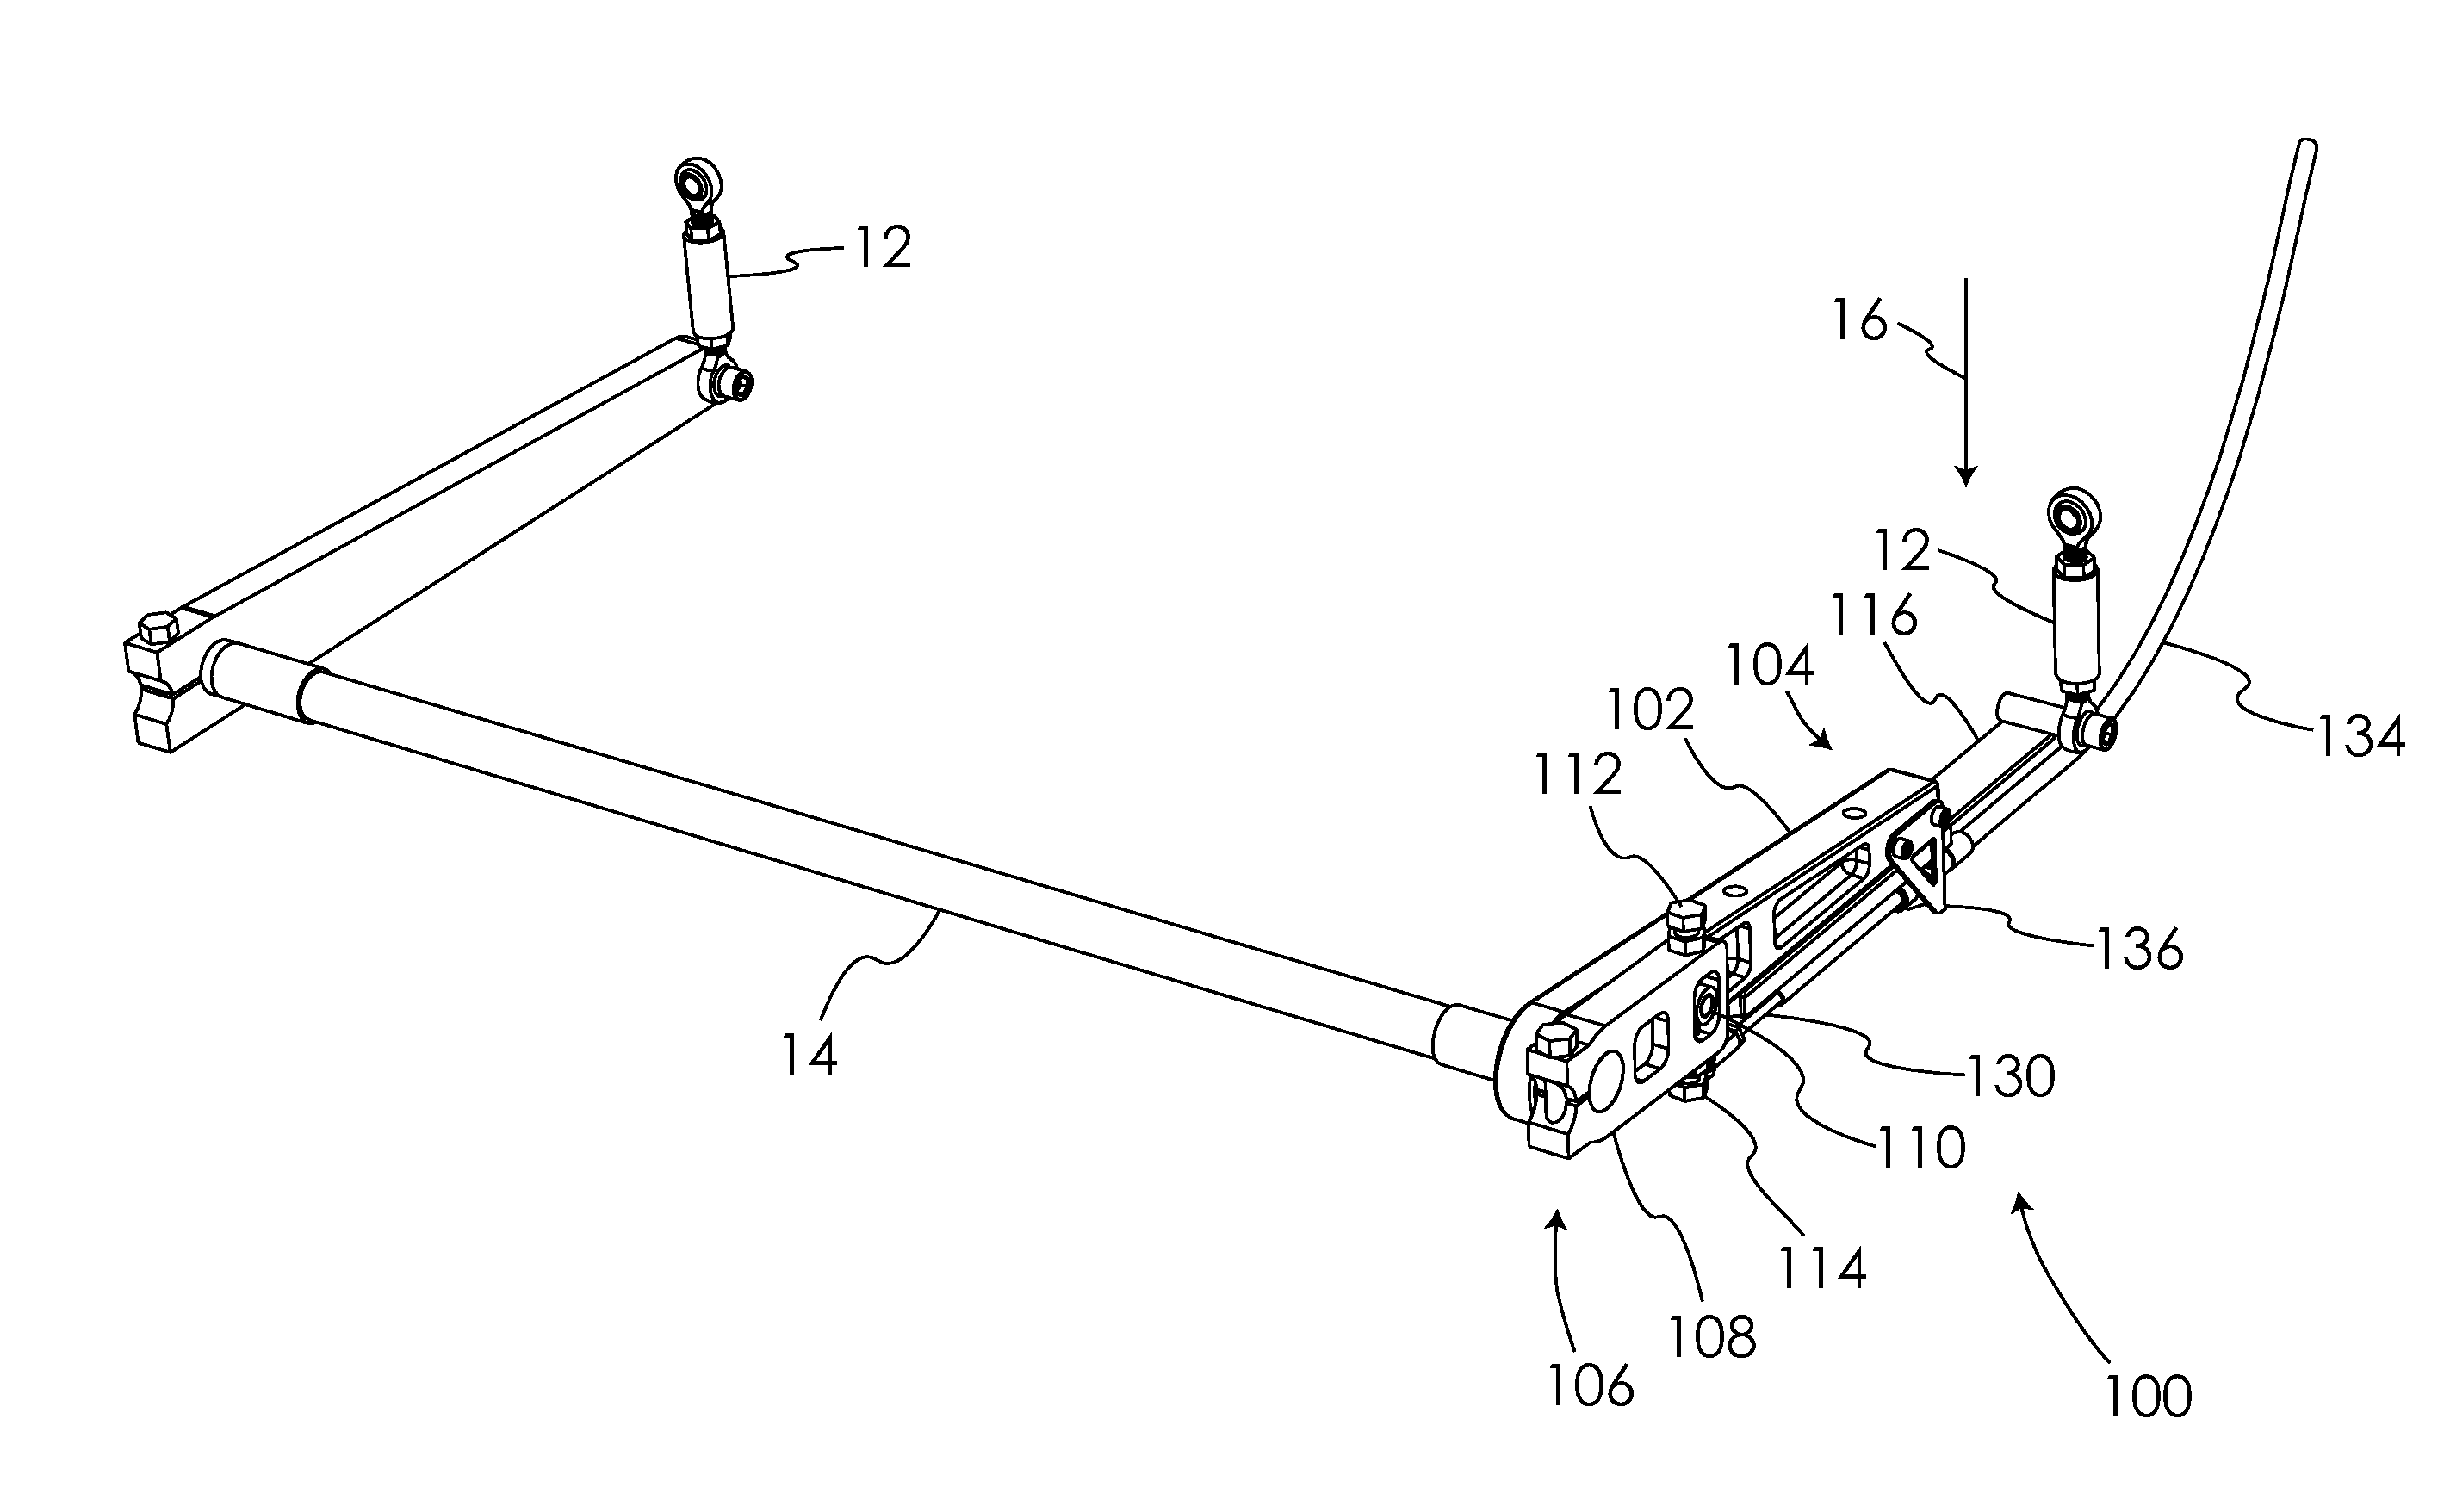 Adjustable Anti-roll bar for vehicles